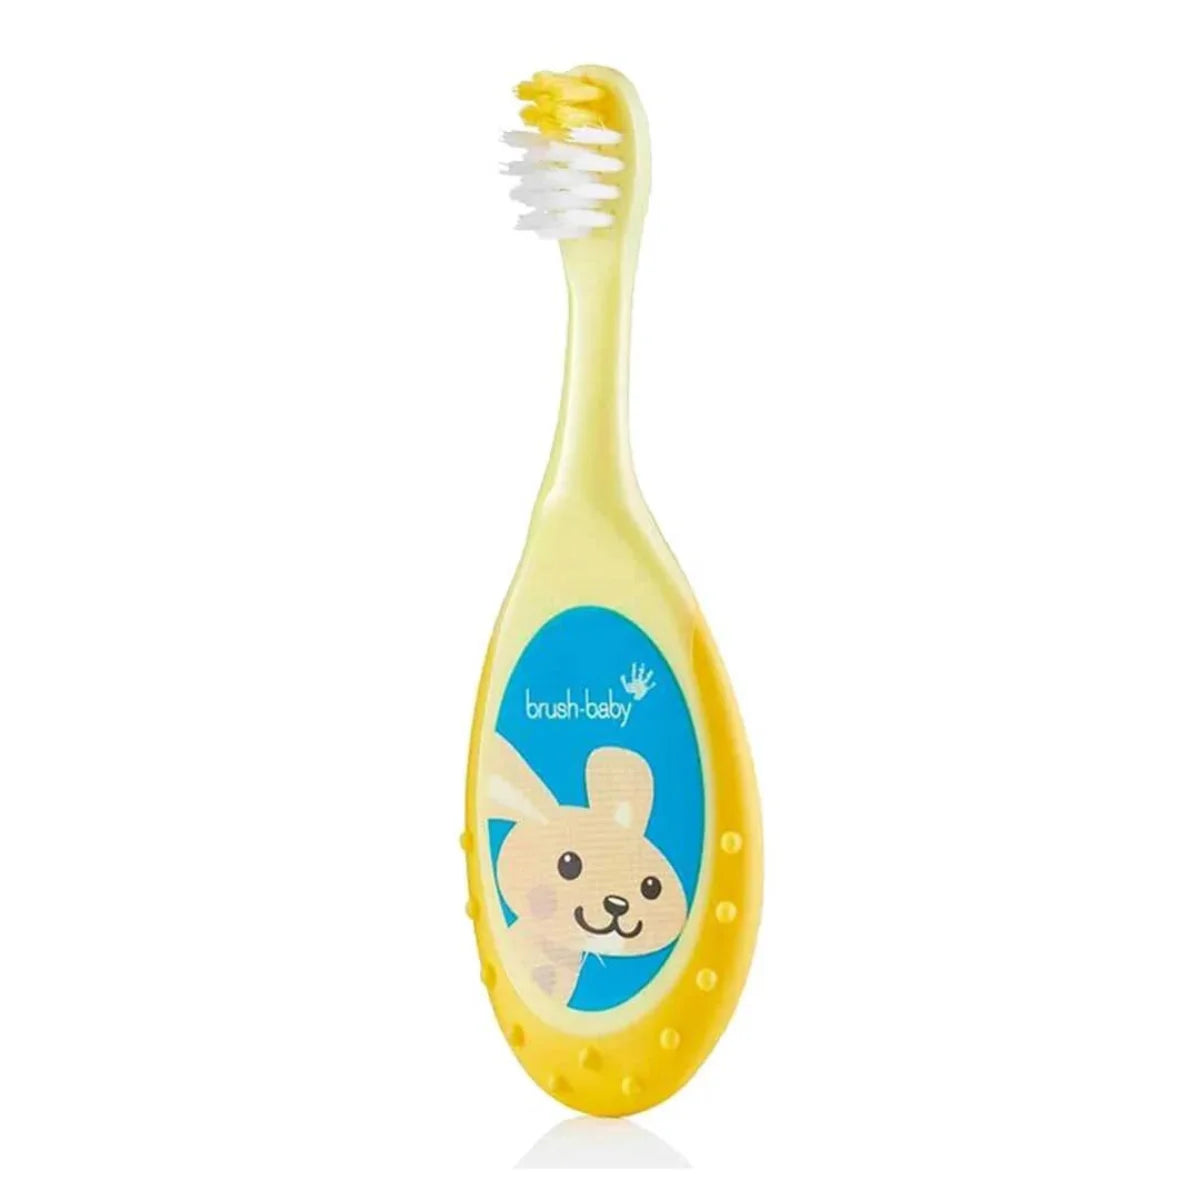 yellow flossbrush baby first toothbrush perfect for 0-3 year olds